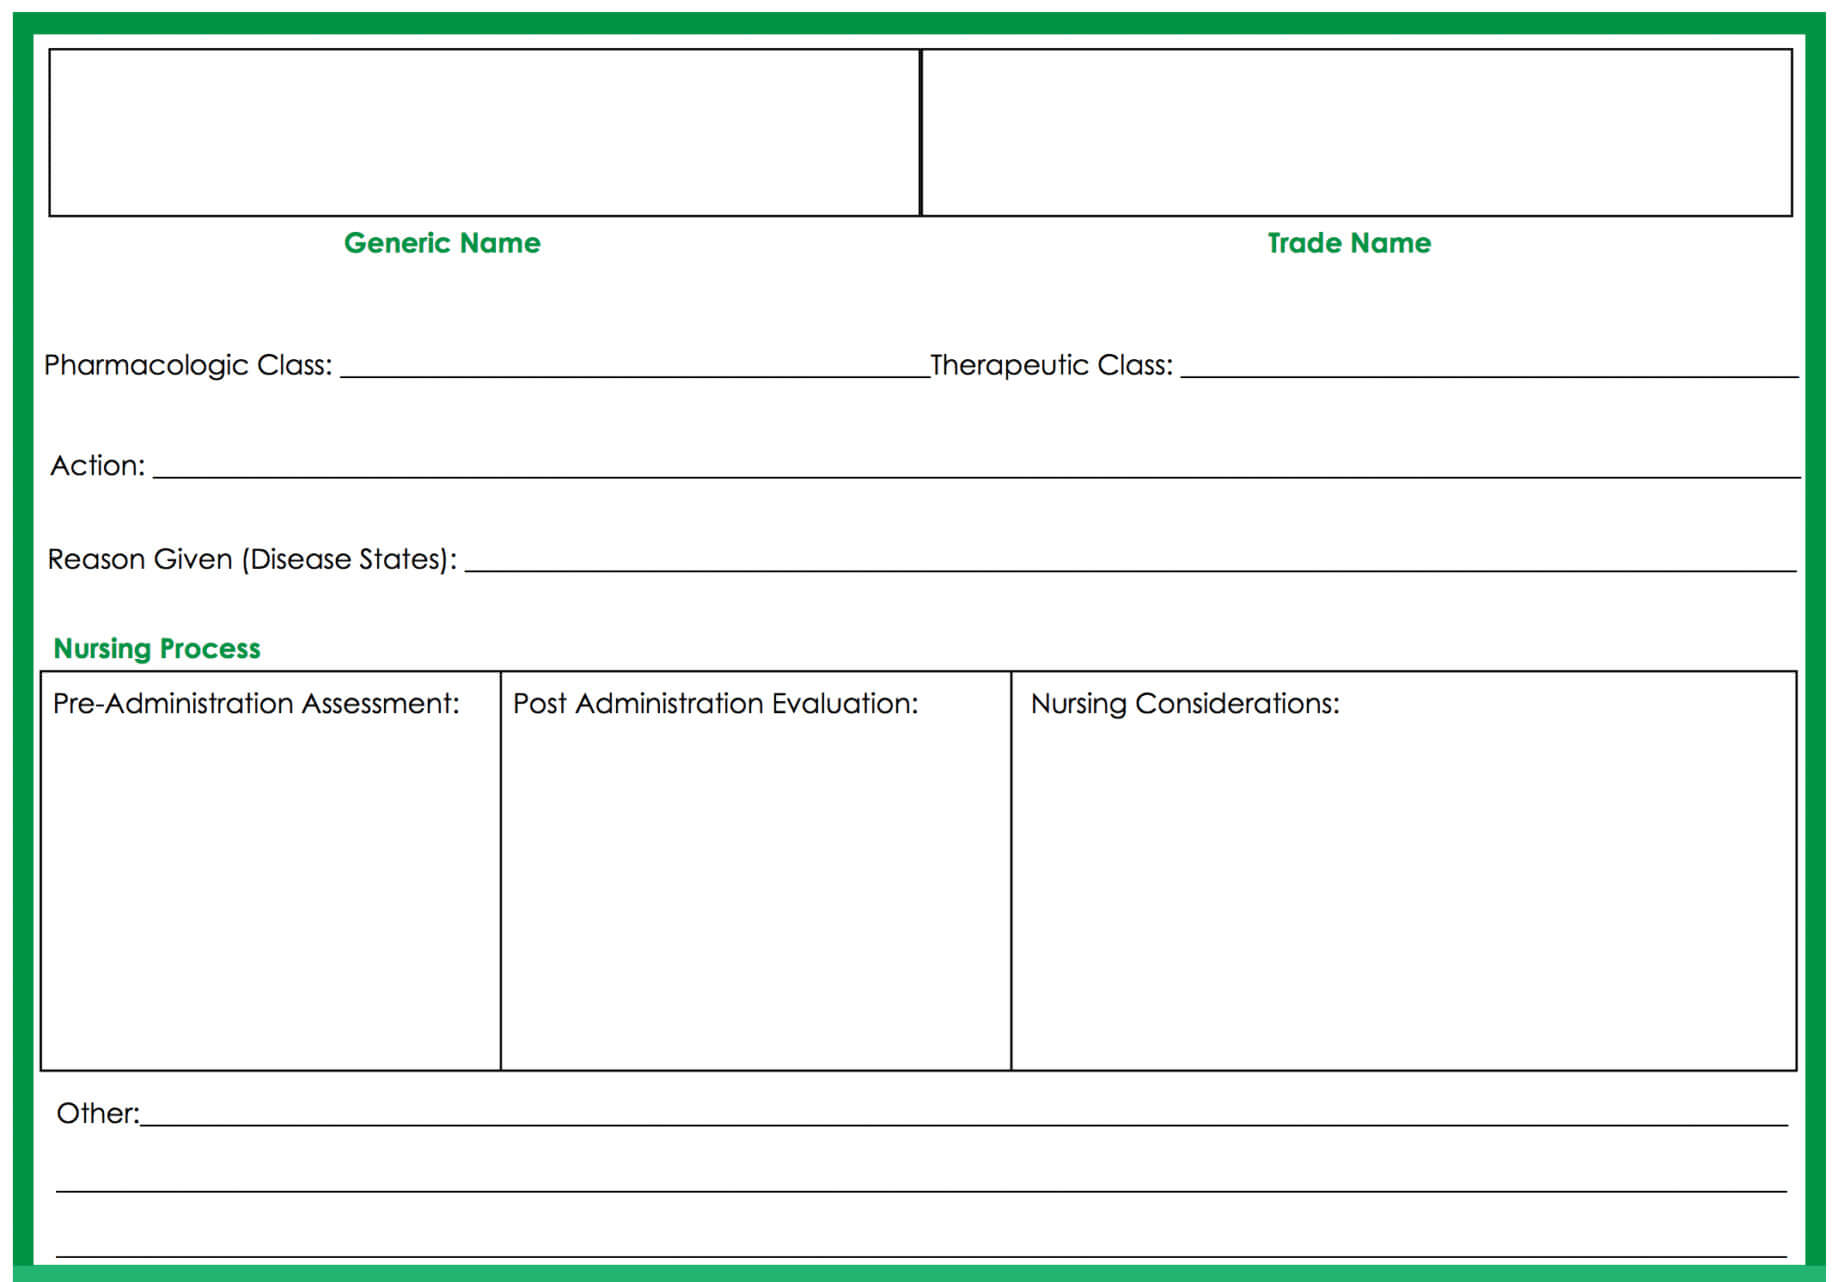 Drug Cards Template – Forza.mbiconsultingltd With Regard To Pharmacology Drug Card Template